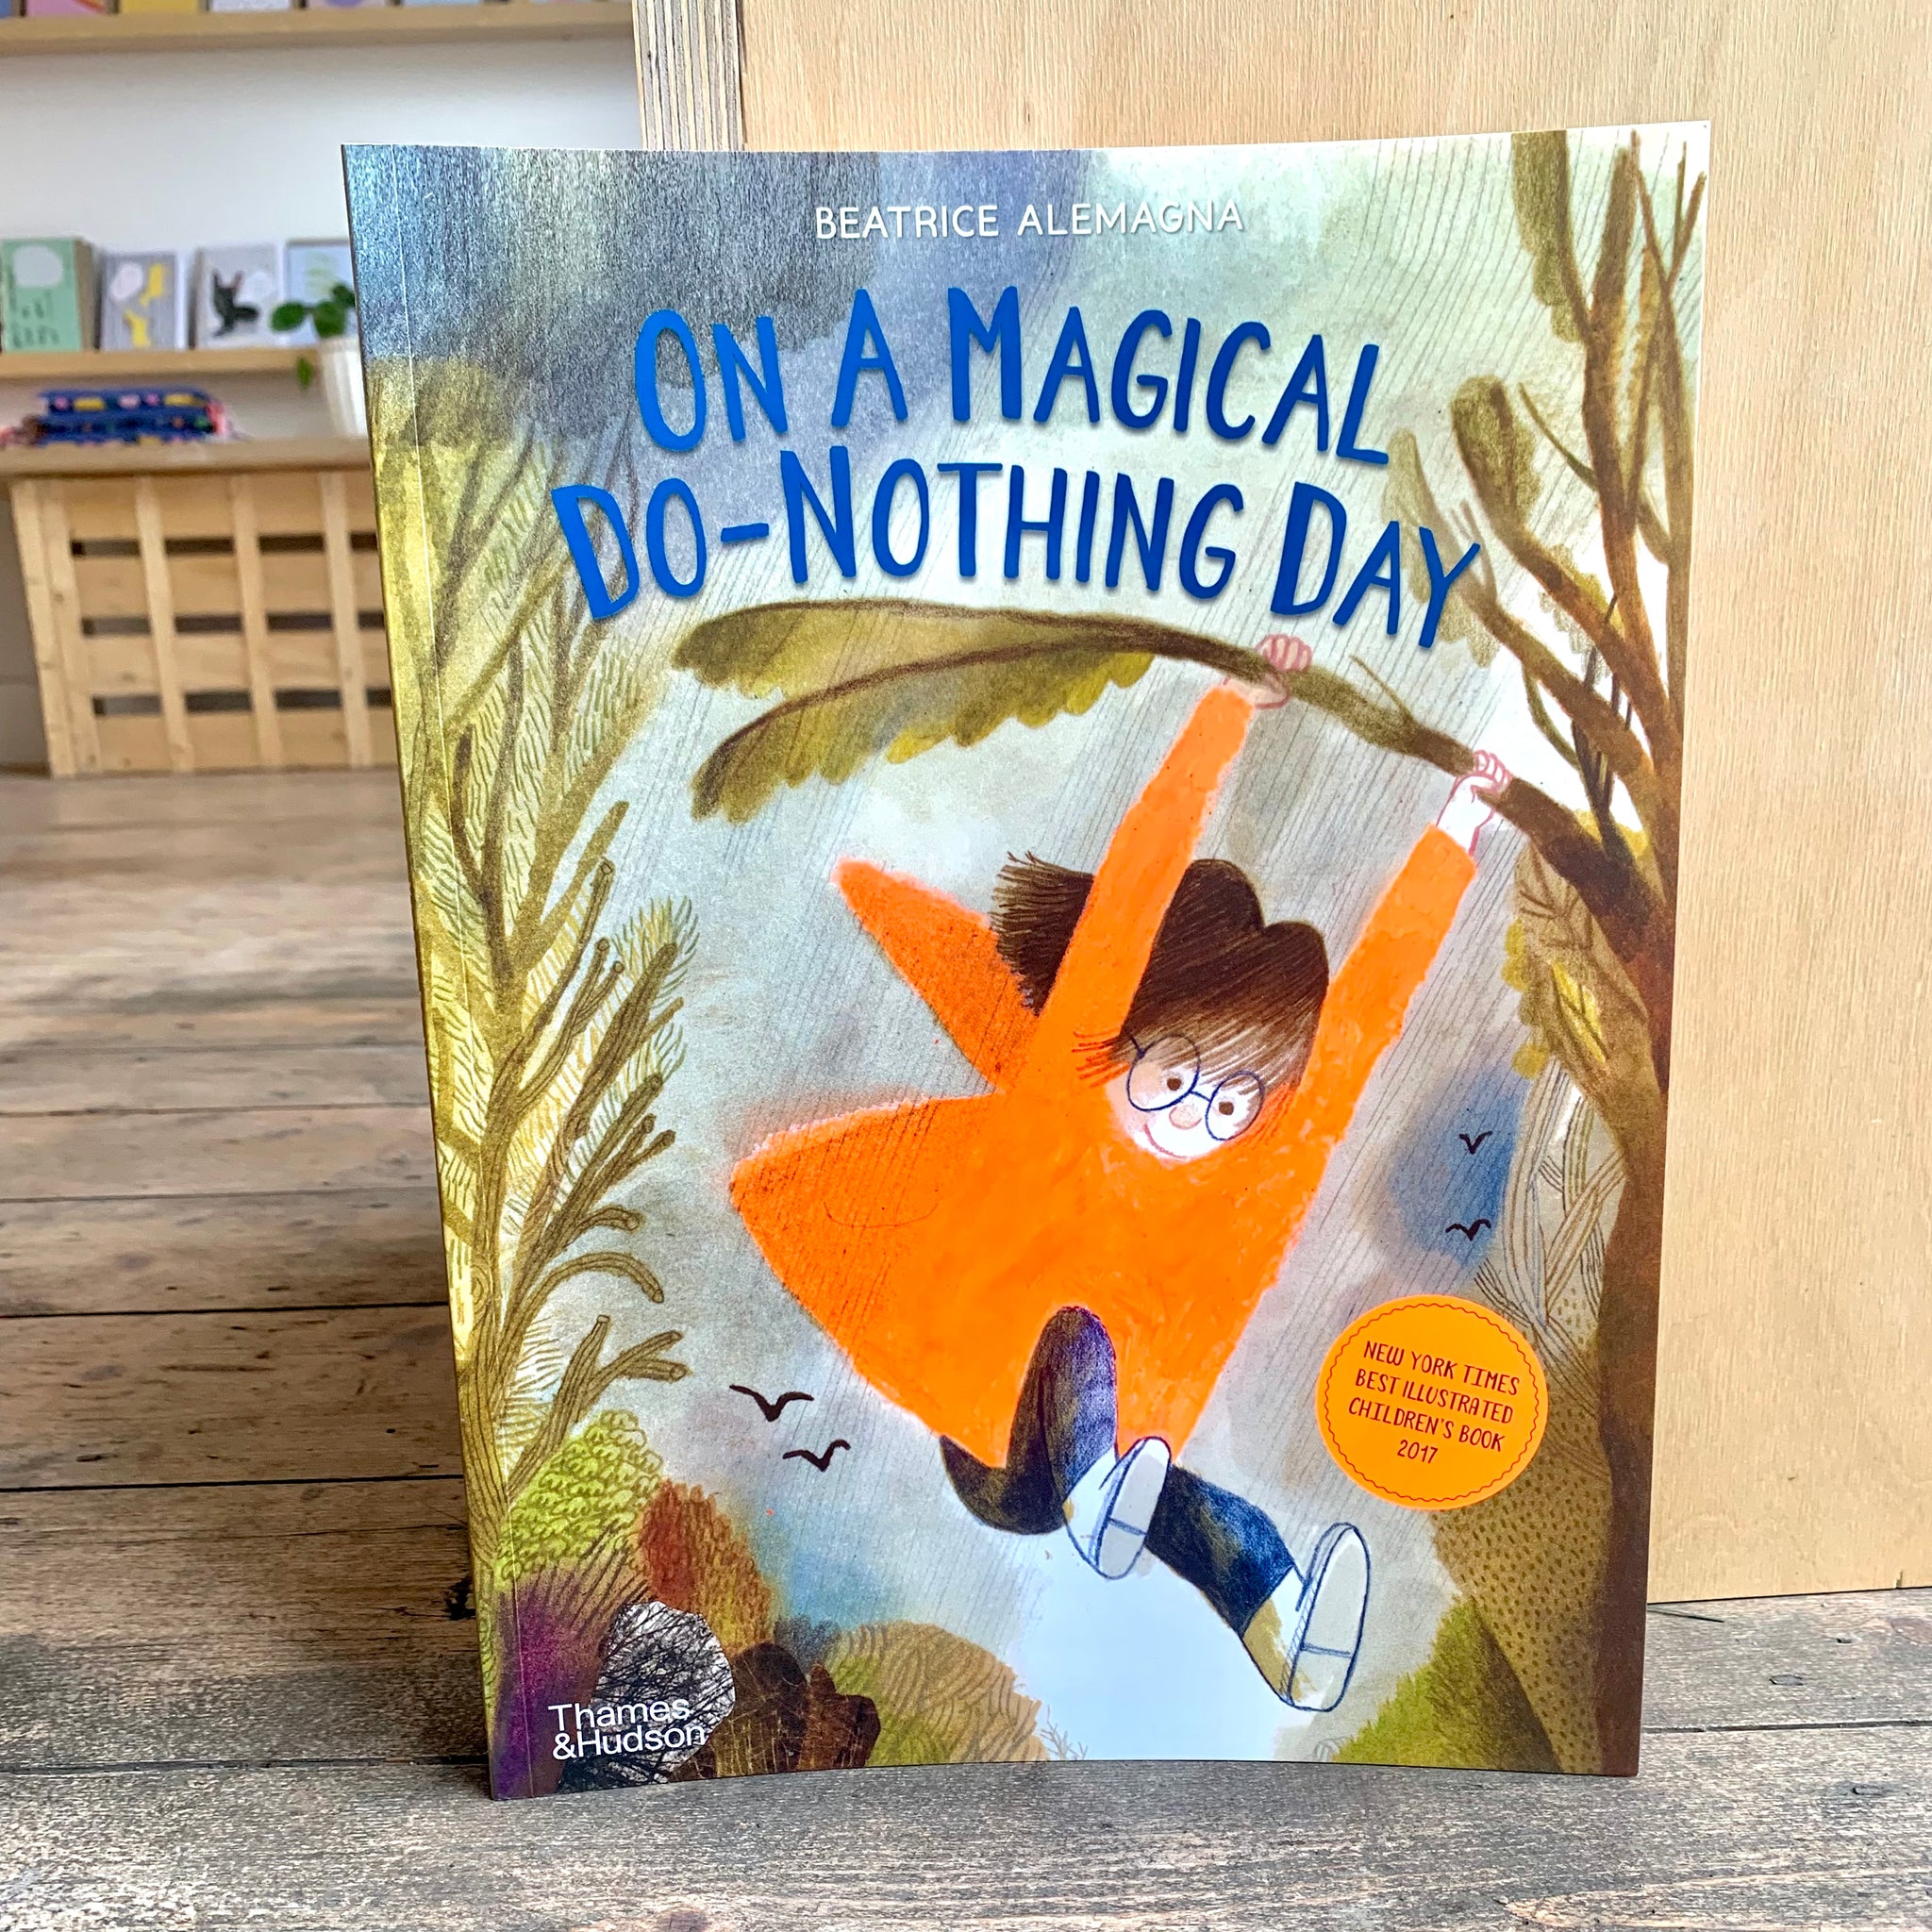 On a Magical Do - Nothing Day by Beatrice Alemagna Paperback book